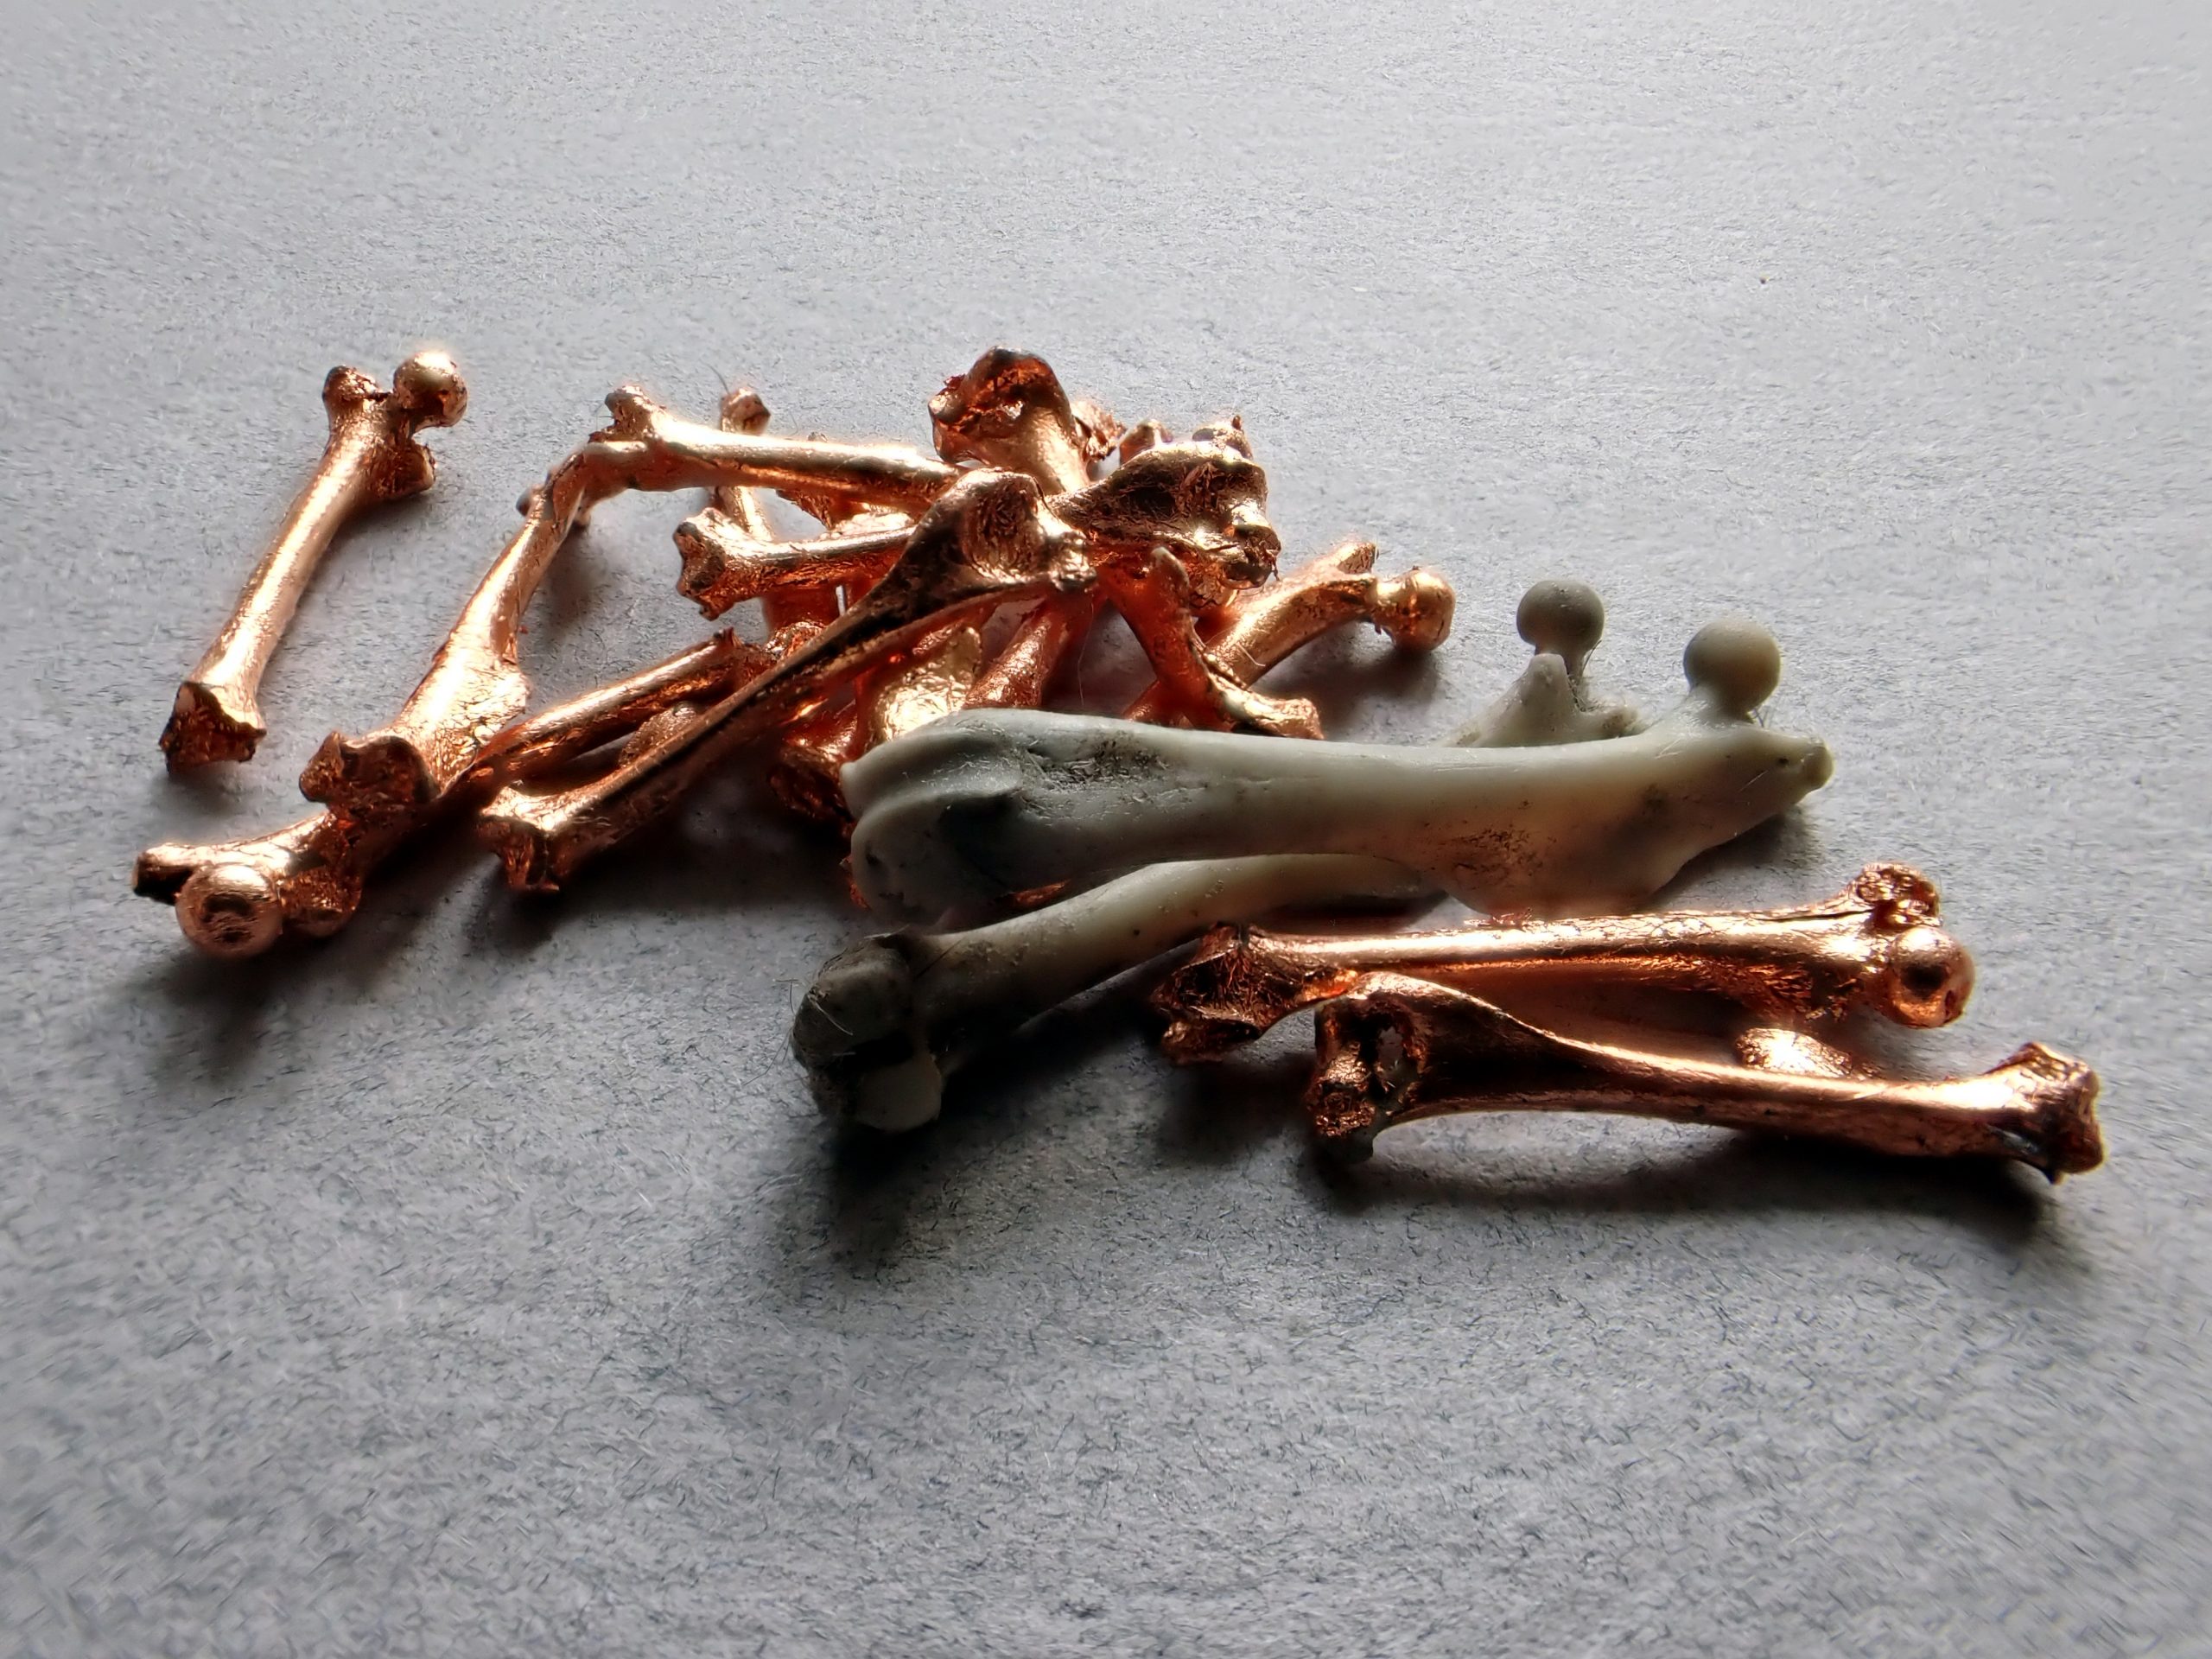 Image: Rebecca Beachy, Mice Bones, 2022. Image centers a pile of mice bones the artist gilds with copper and various metals. Image courtesy of the curator and artist.